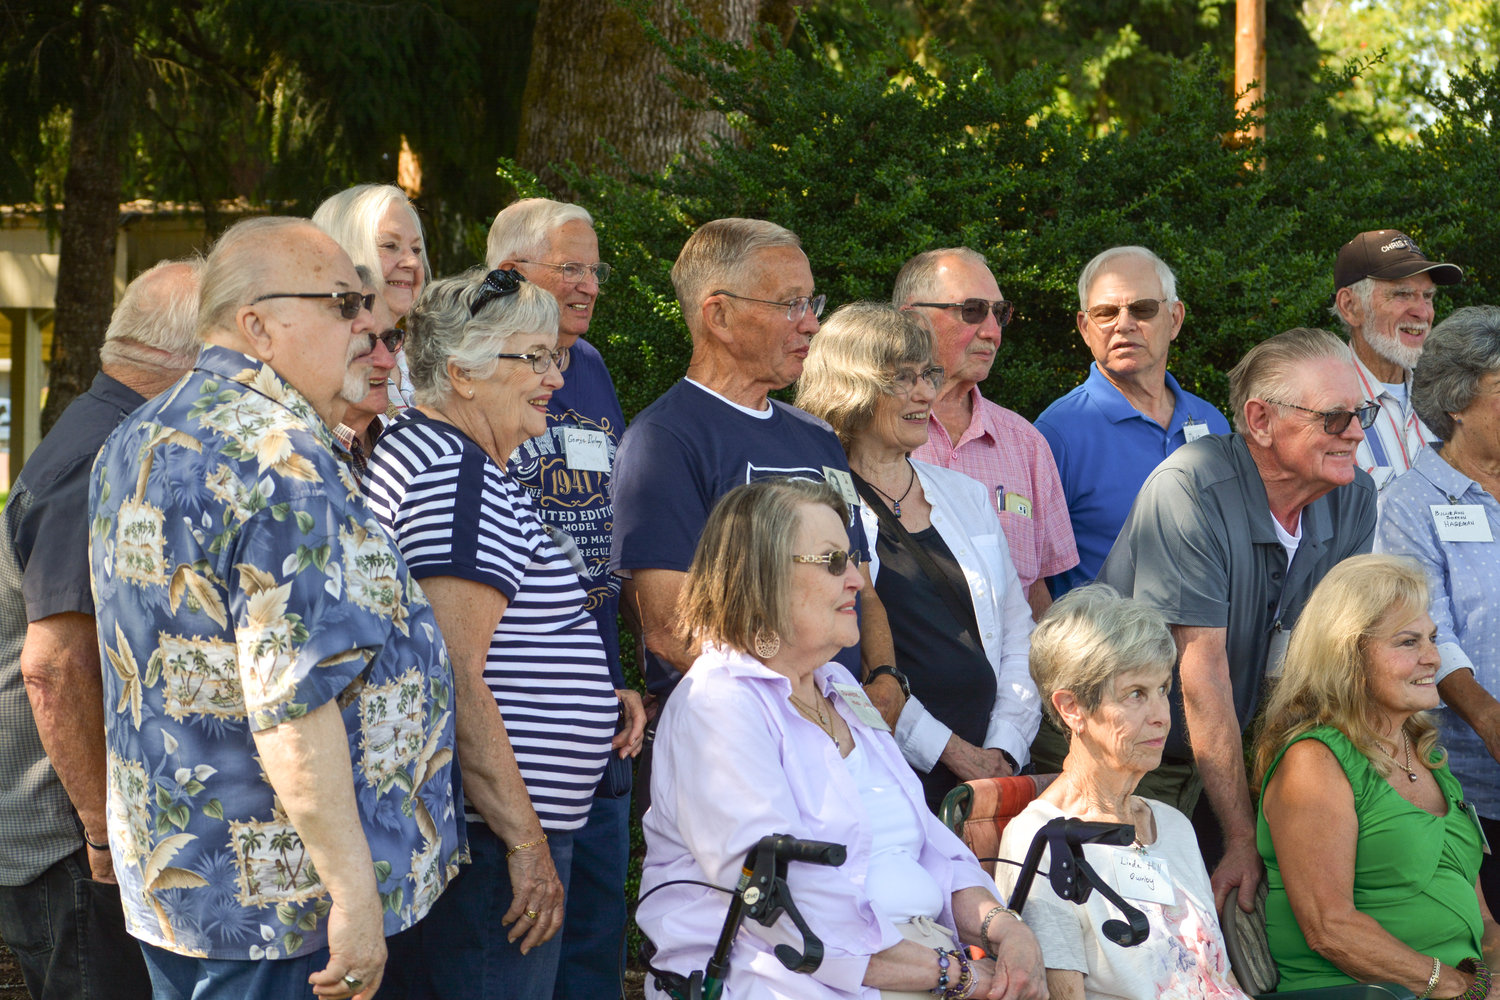 About 70 members of Battle Ground High School’s class of 1960 gathered on Aug. 18 at Kiwanis Park for a reunion.